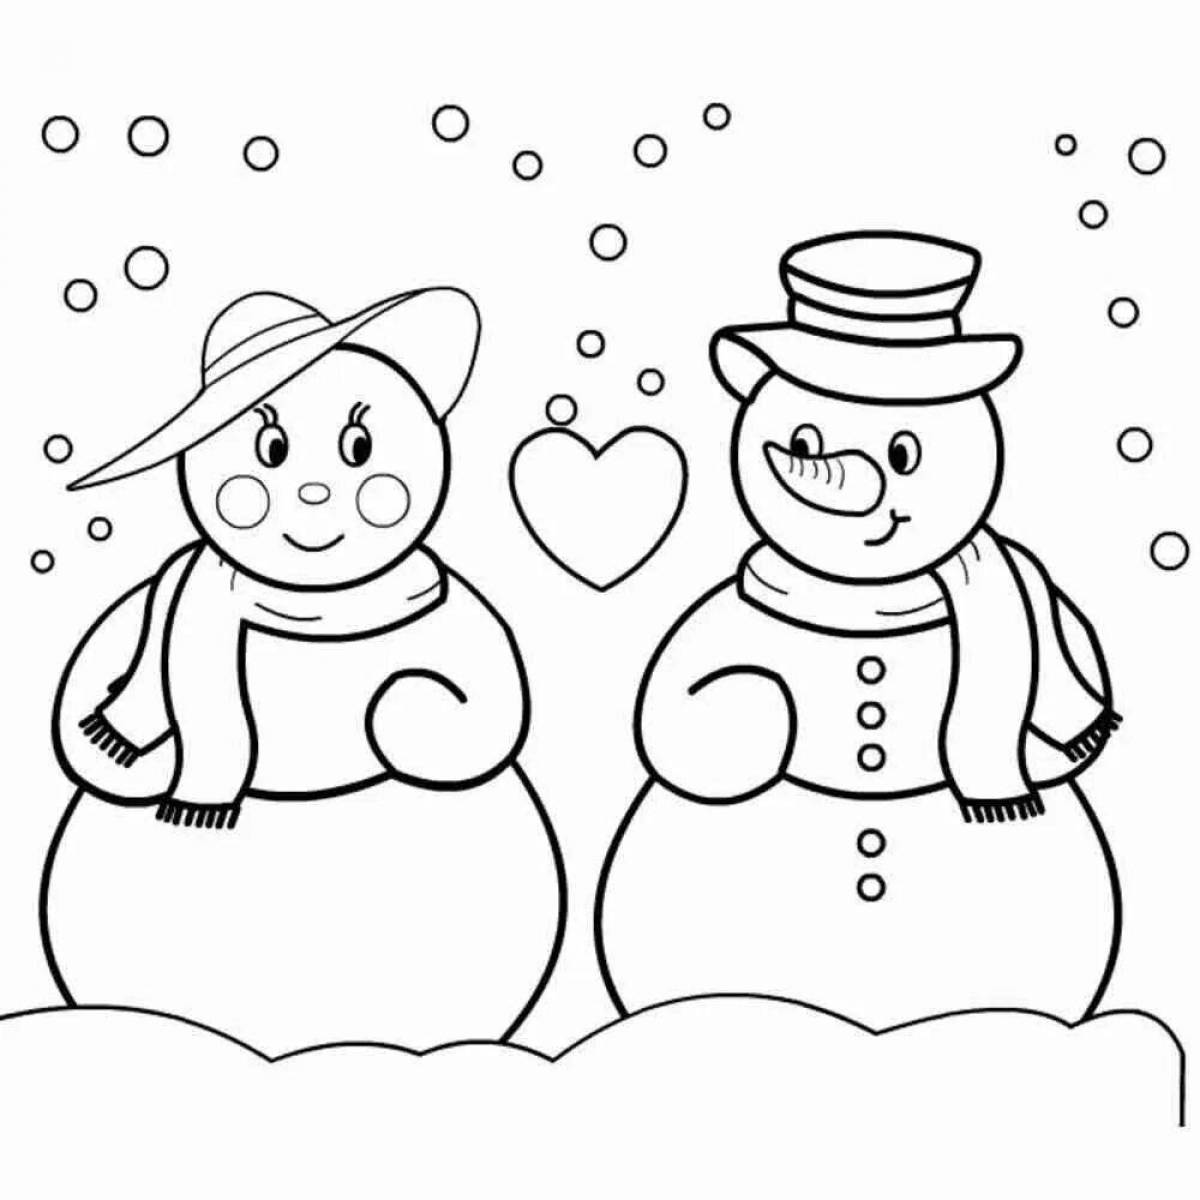 Glowing snowman coloring book for kids 2 3